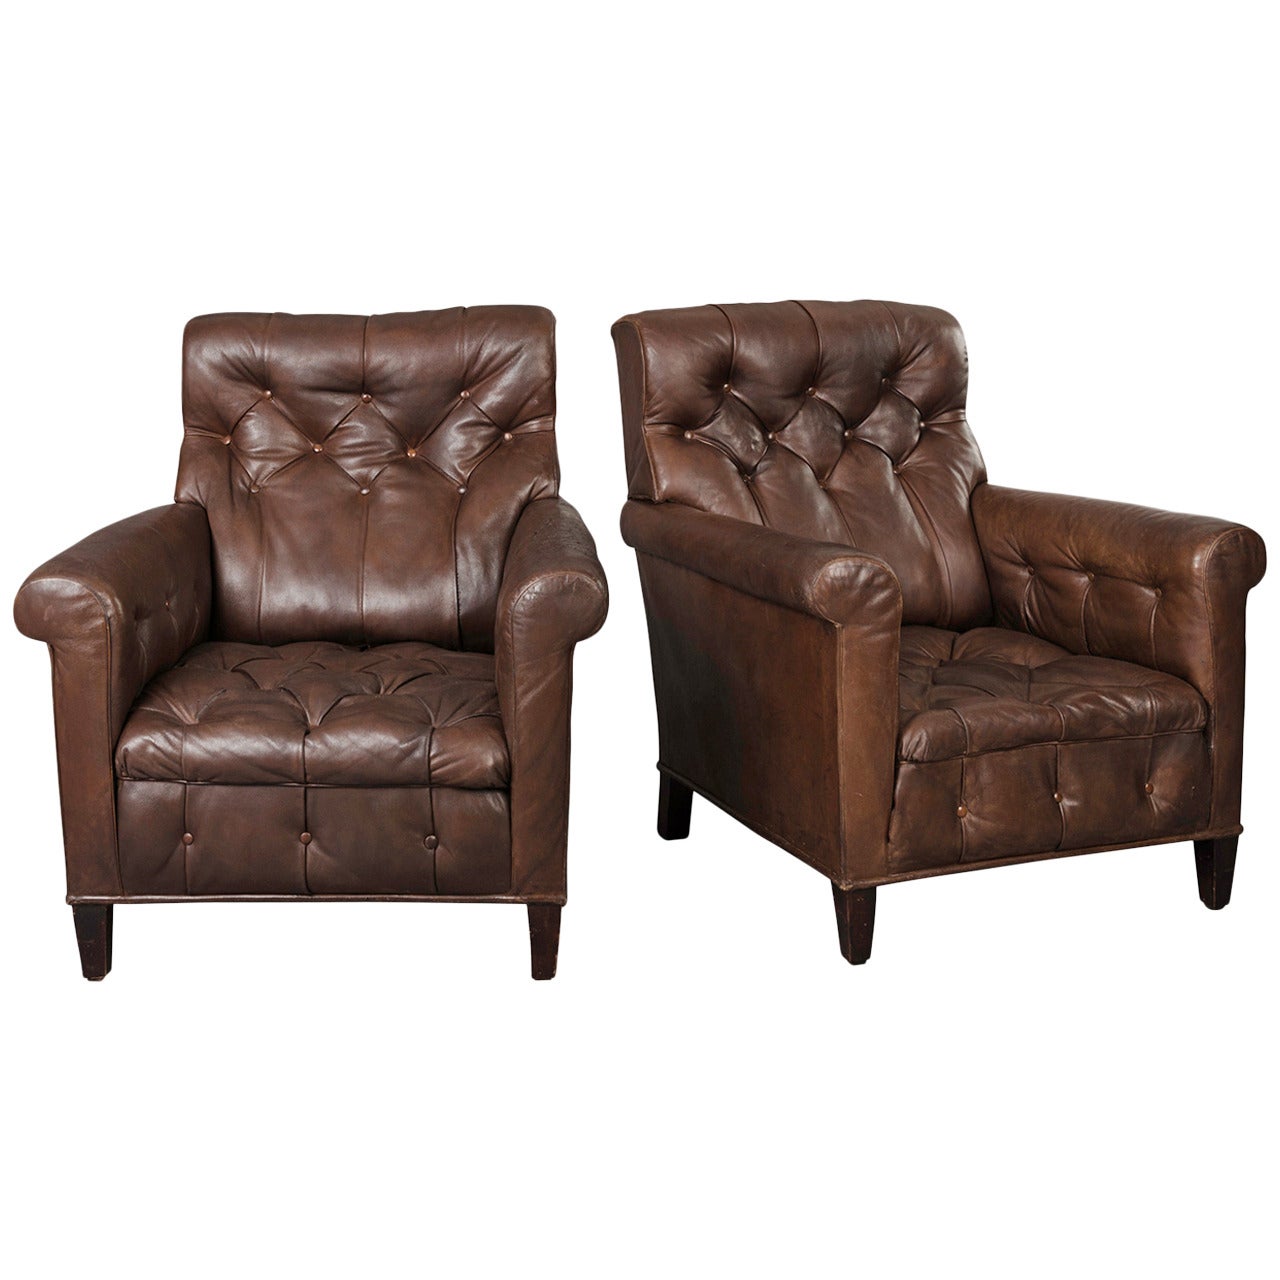 Pair of Early 20th Century Tufted Leather Armchairs For Sale